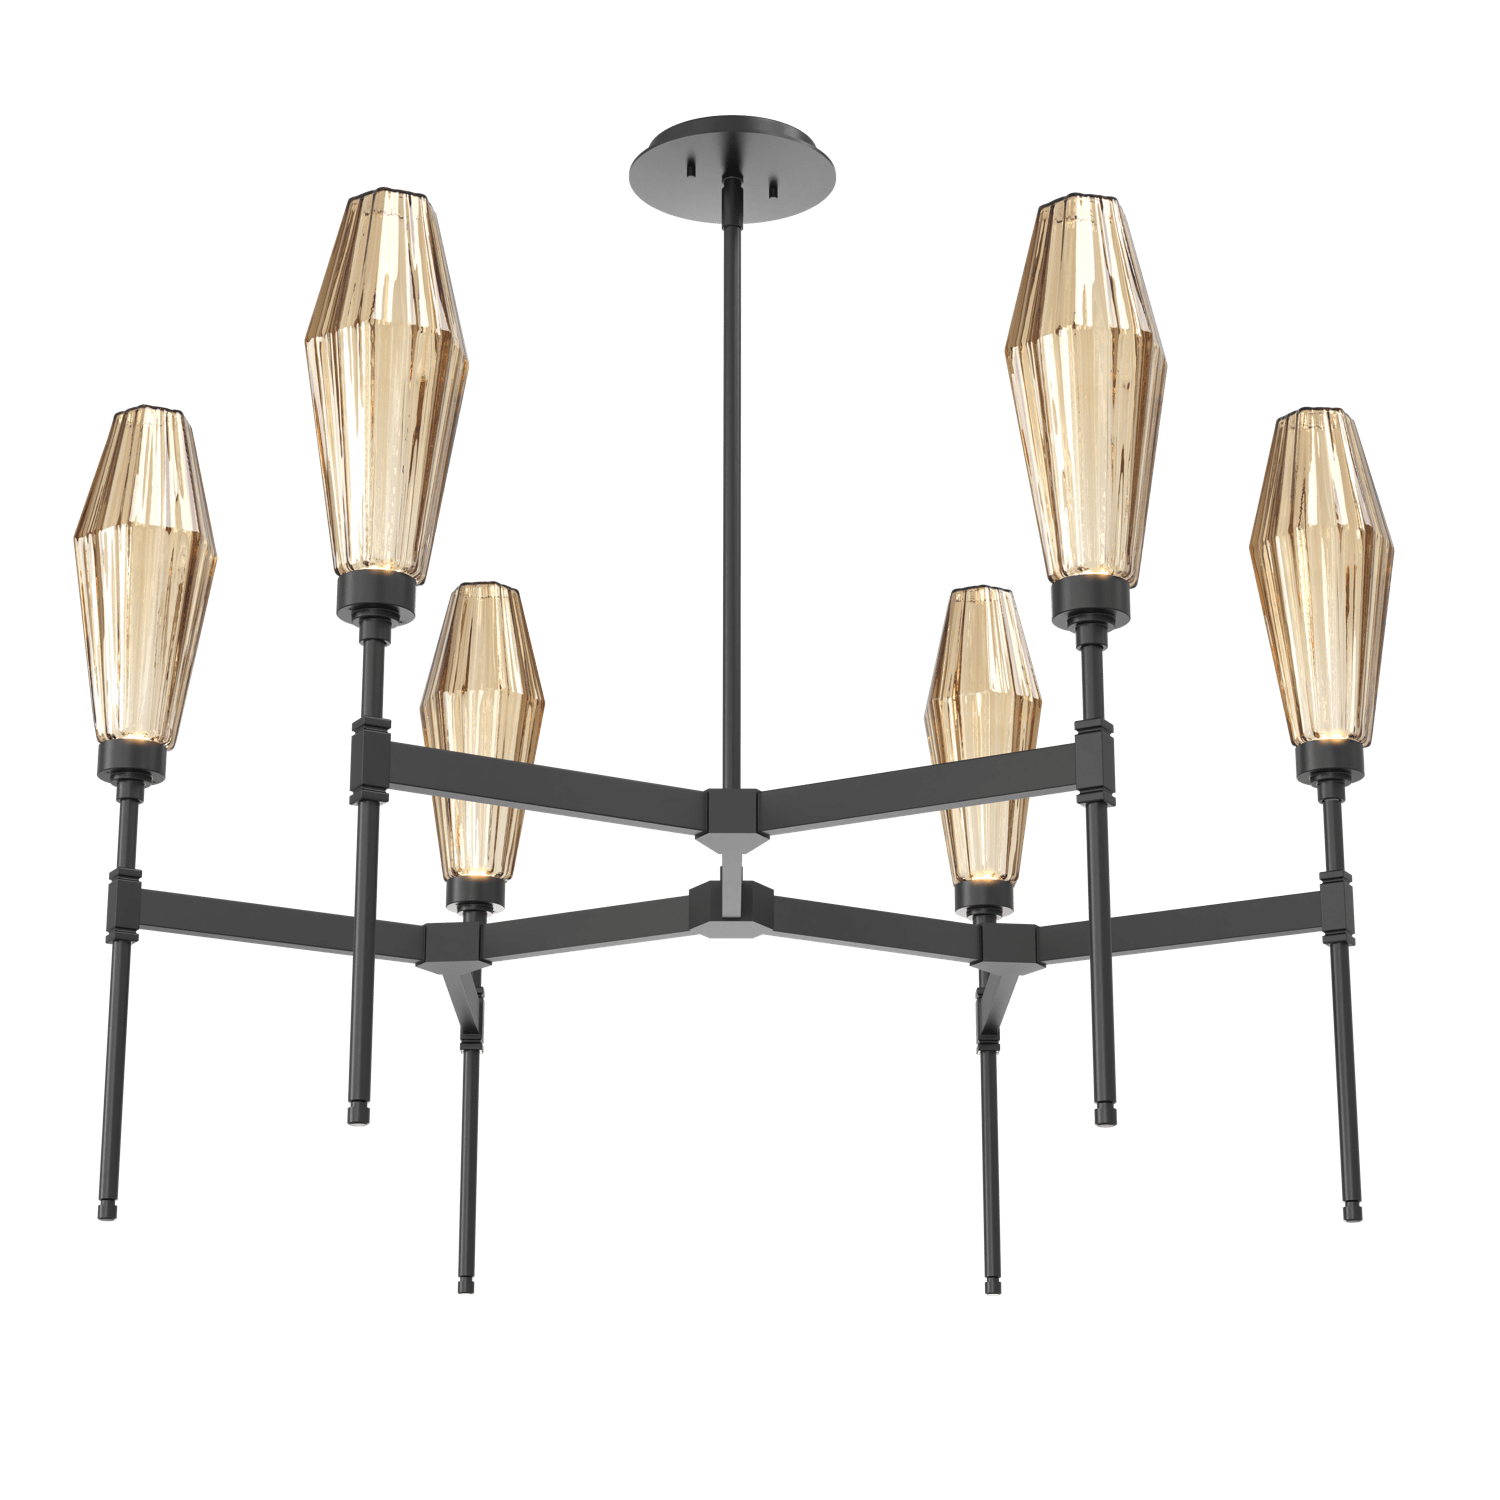 CHB0049-37-MB-RB-Hammerton-Studio-Aalto-37-inch-round-belvedere-chandelier-with-matte-black-finish-and-optic-ribbed-bronze-glass-shades-and-LED-lamping